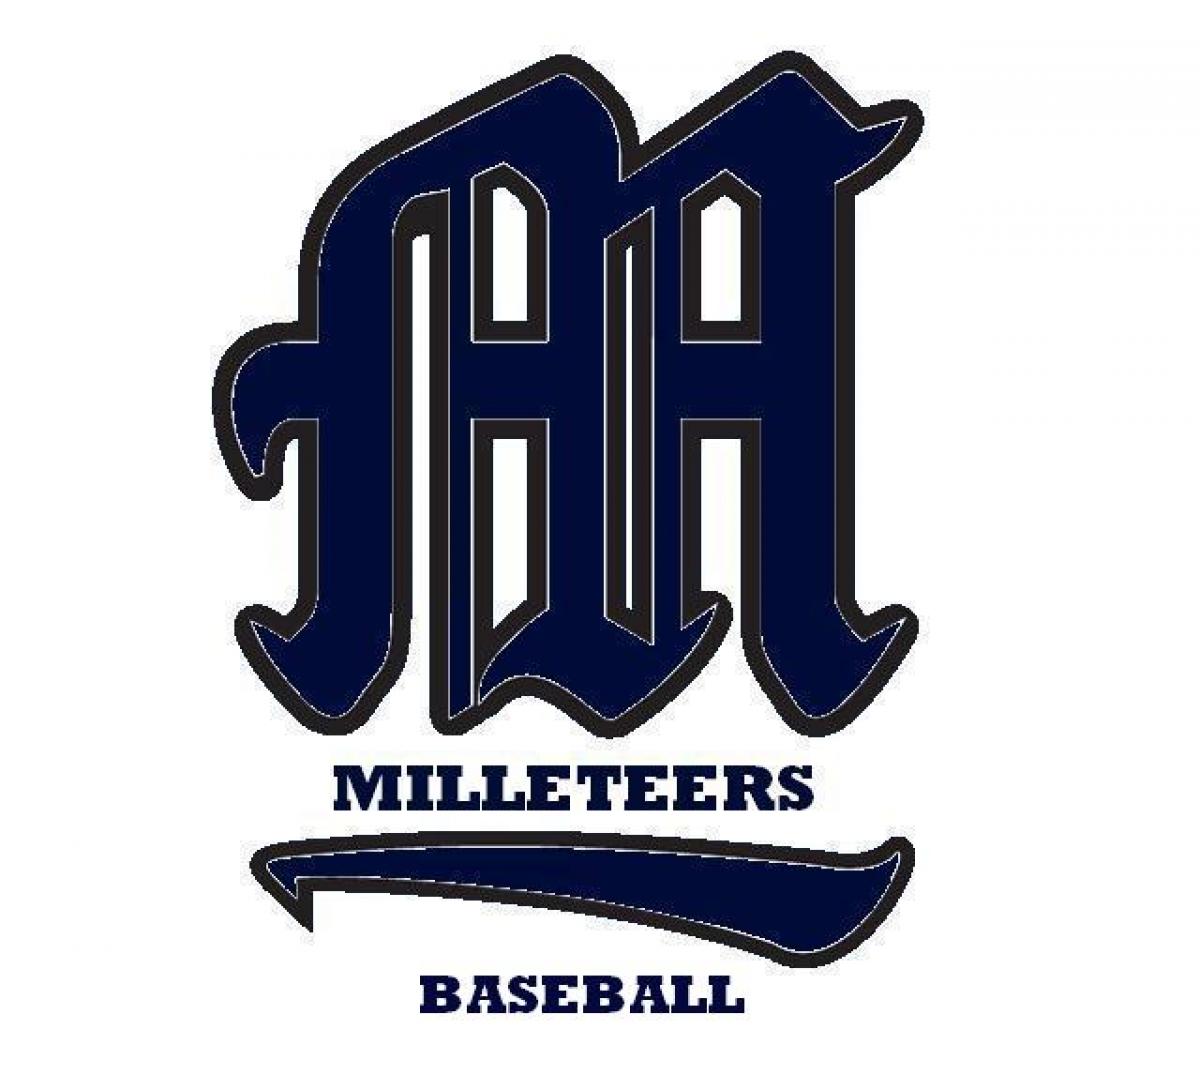 Shorthanded Milleteers Hand Struggling As Another Loss